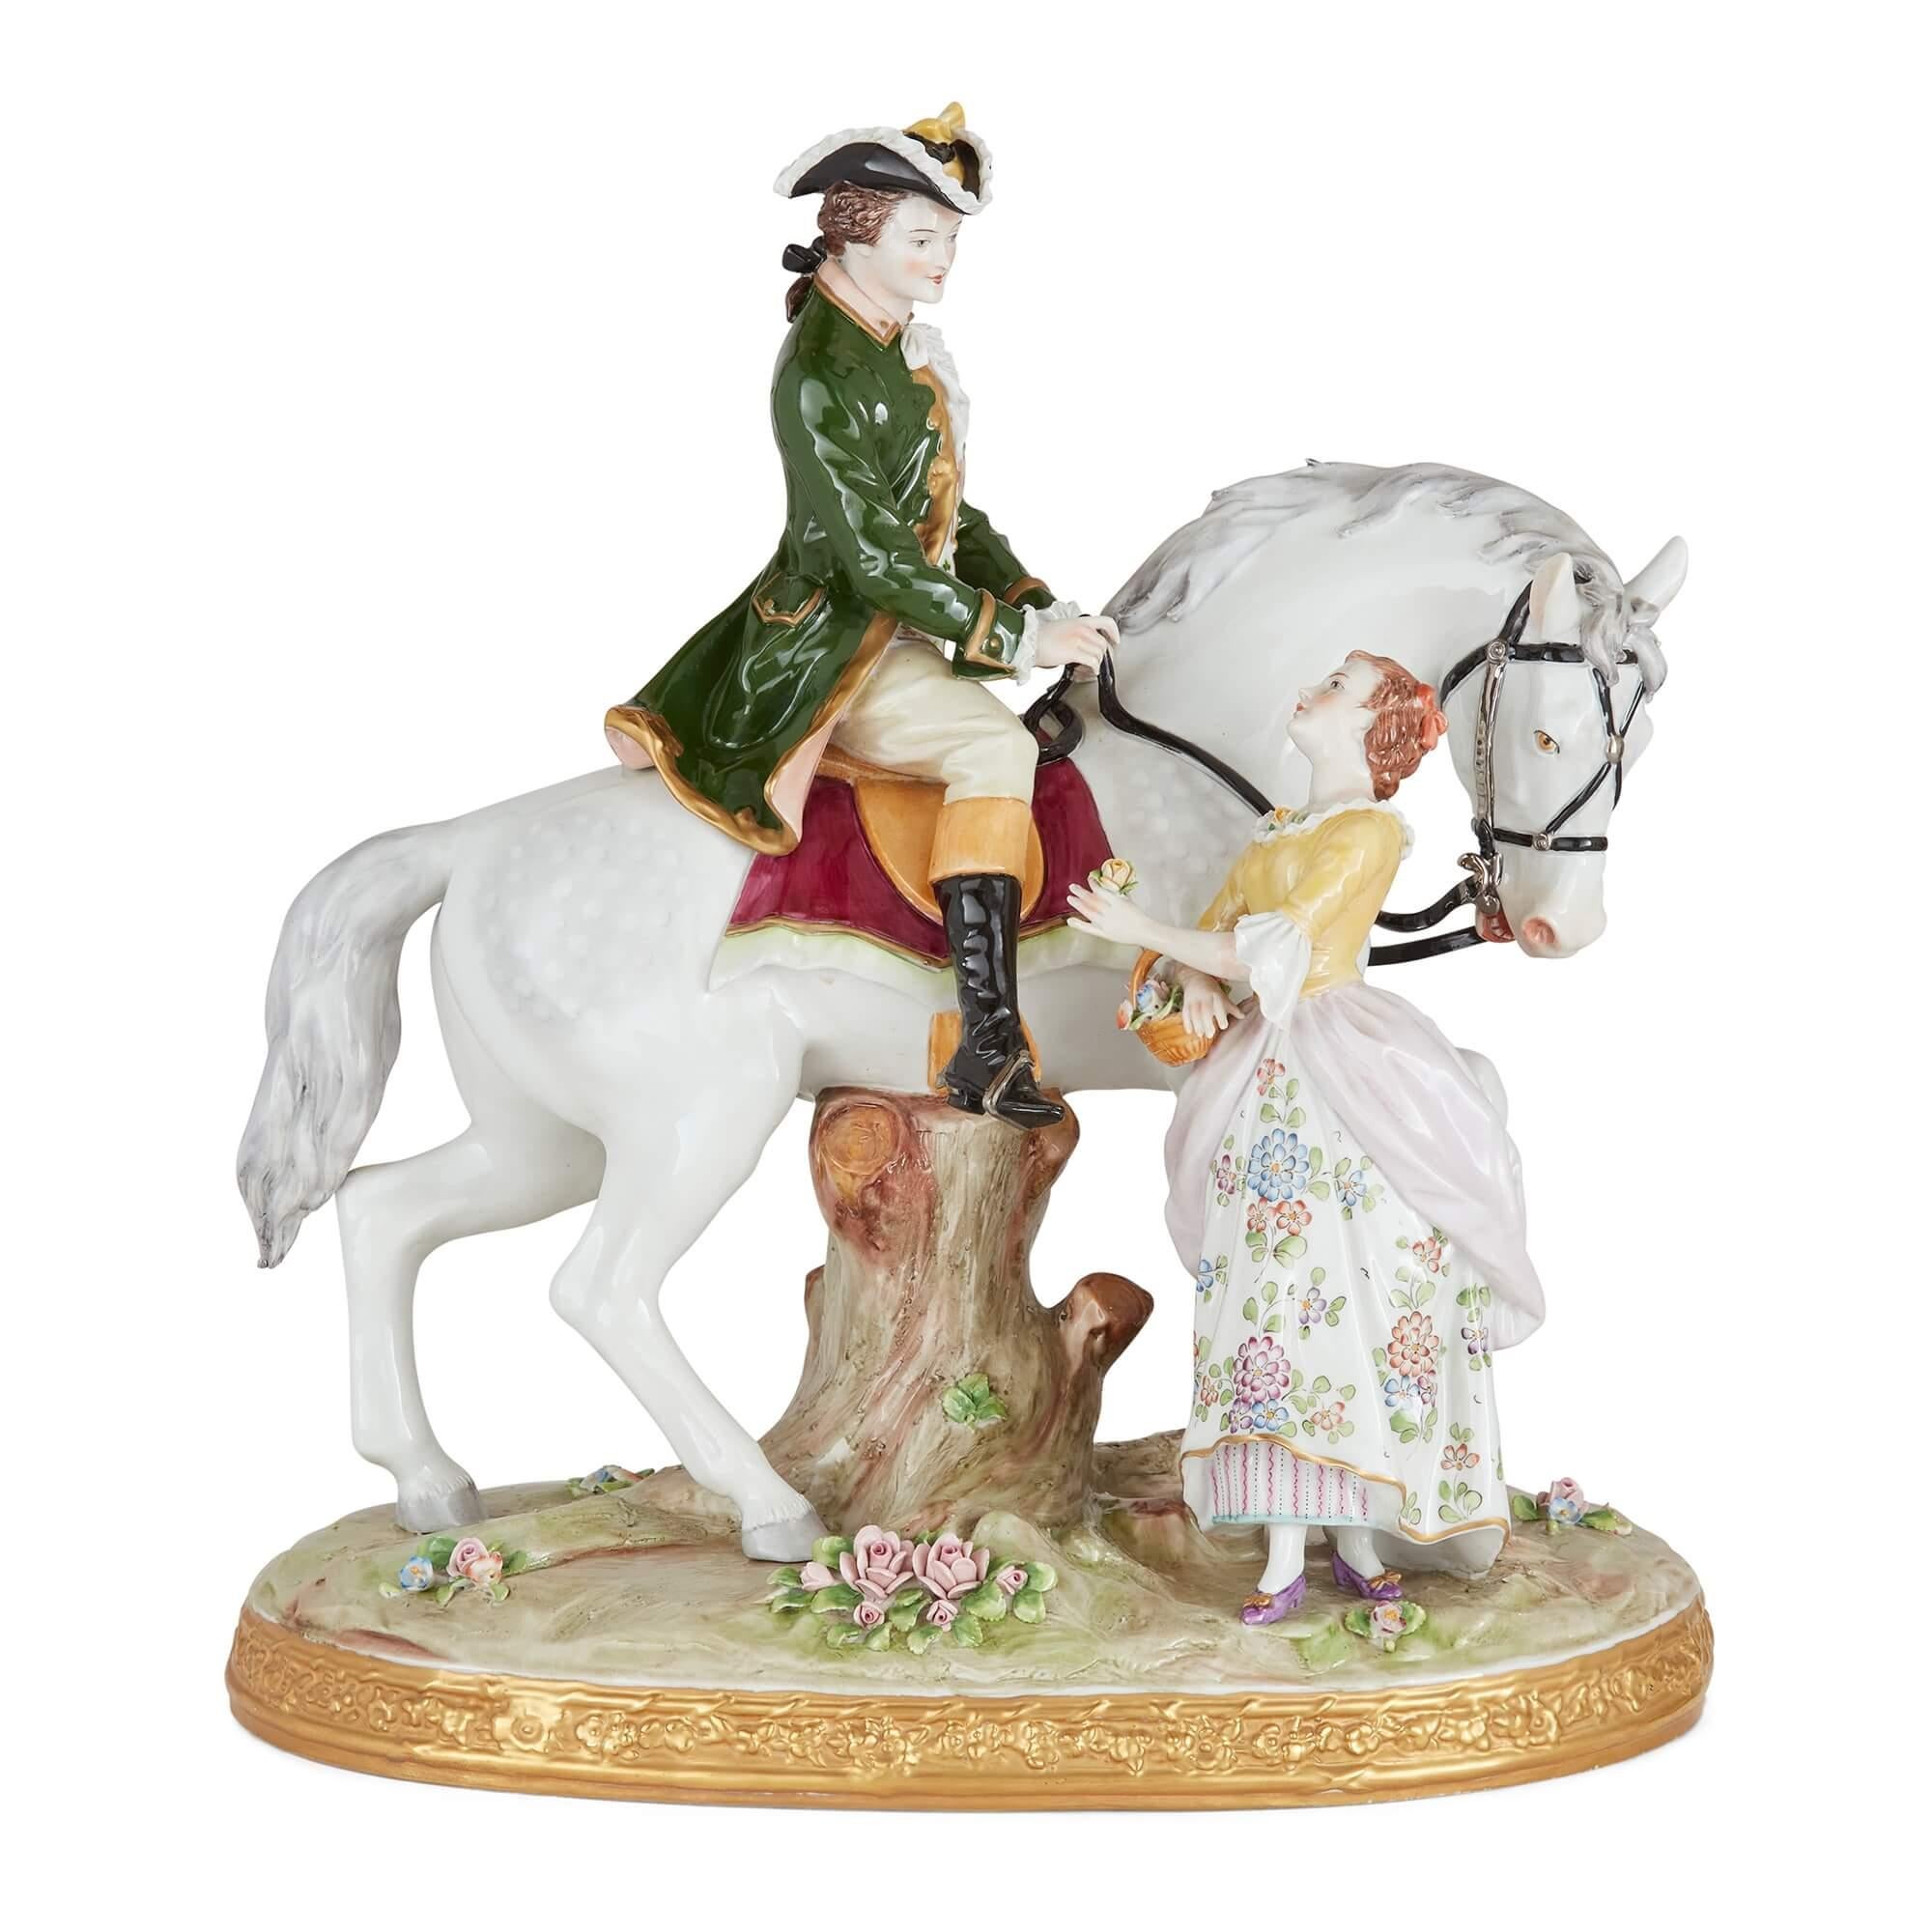 Pair of large Sitzendorf porcelain figural groups on horseback
German, 20th Century 
Height 38cm, width 35cm, depth 22cm

This pair of porcelain figural groups are notable for their fine quality and charming subject. Both sculptures depict a